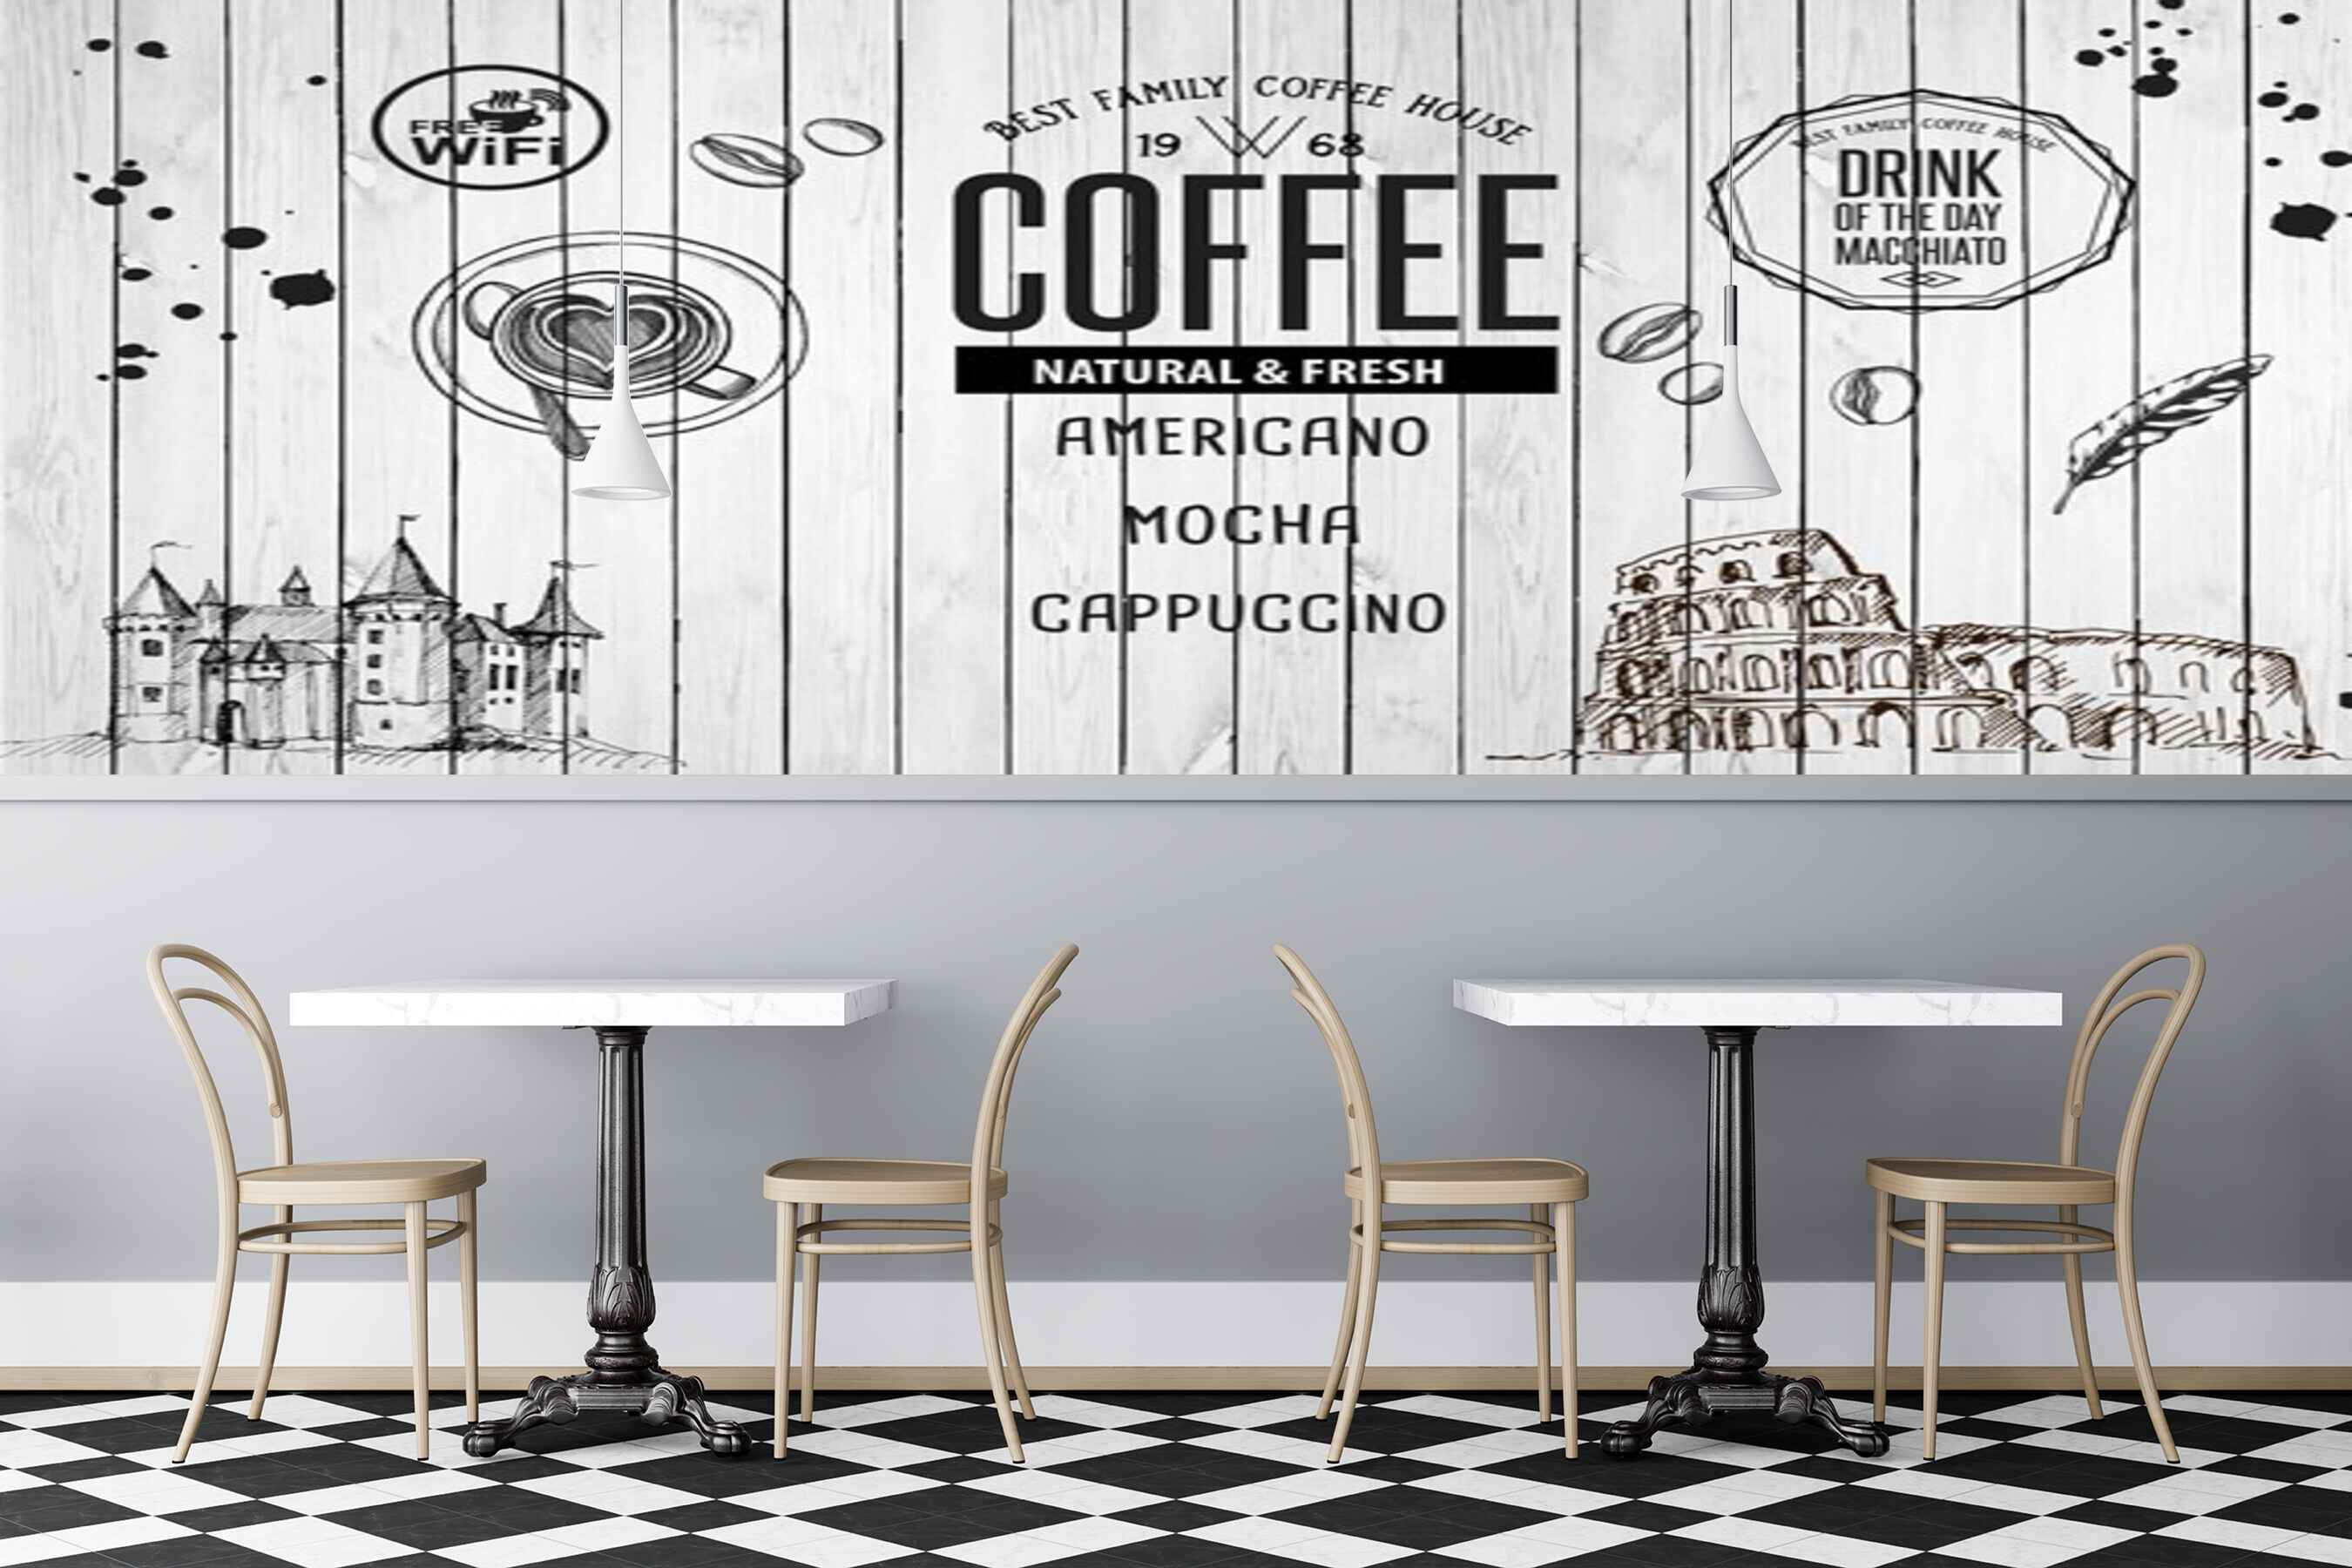 Avikalp MWZ2991 Coffee Cappuccino Cups Buildings HD Wallpaper for Cafe Restaurant